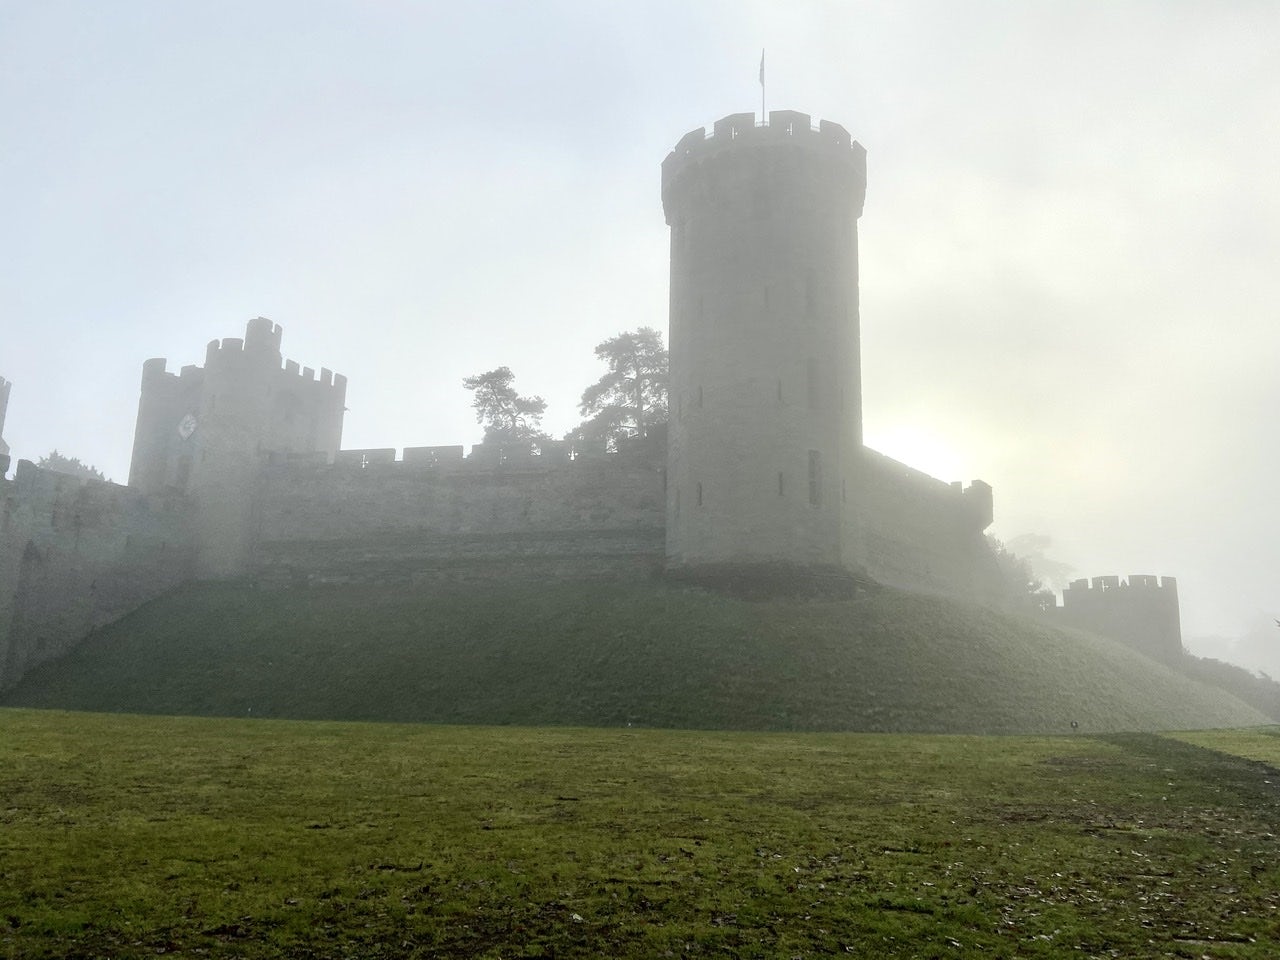 The castle with lots of fog and a clearing sky